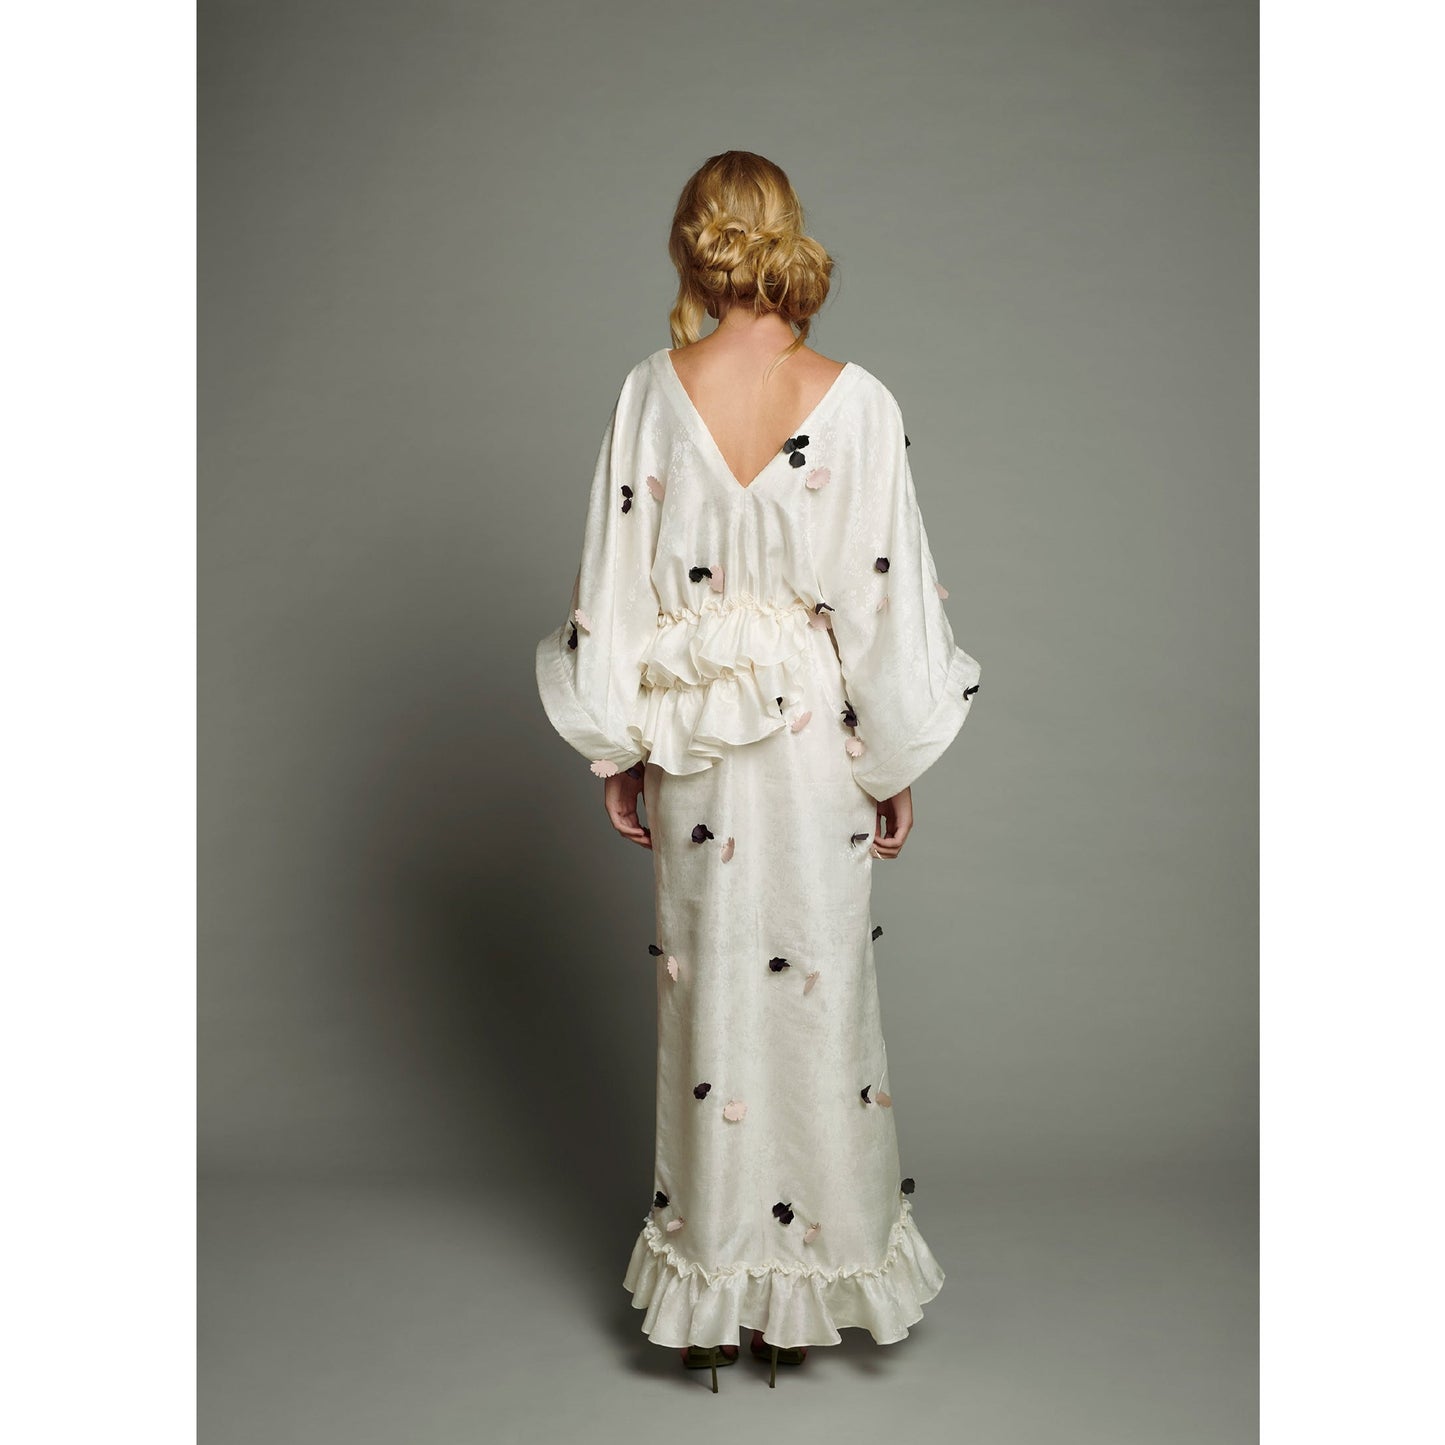 White Jacquard Maxi Dress with Horse Hair Ribbon Sleeve Trim and Bordeaux and Nude 3D Petal Appliqué